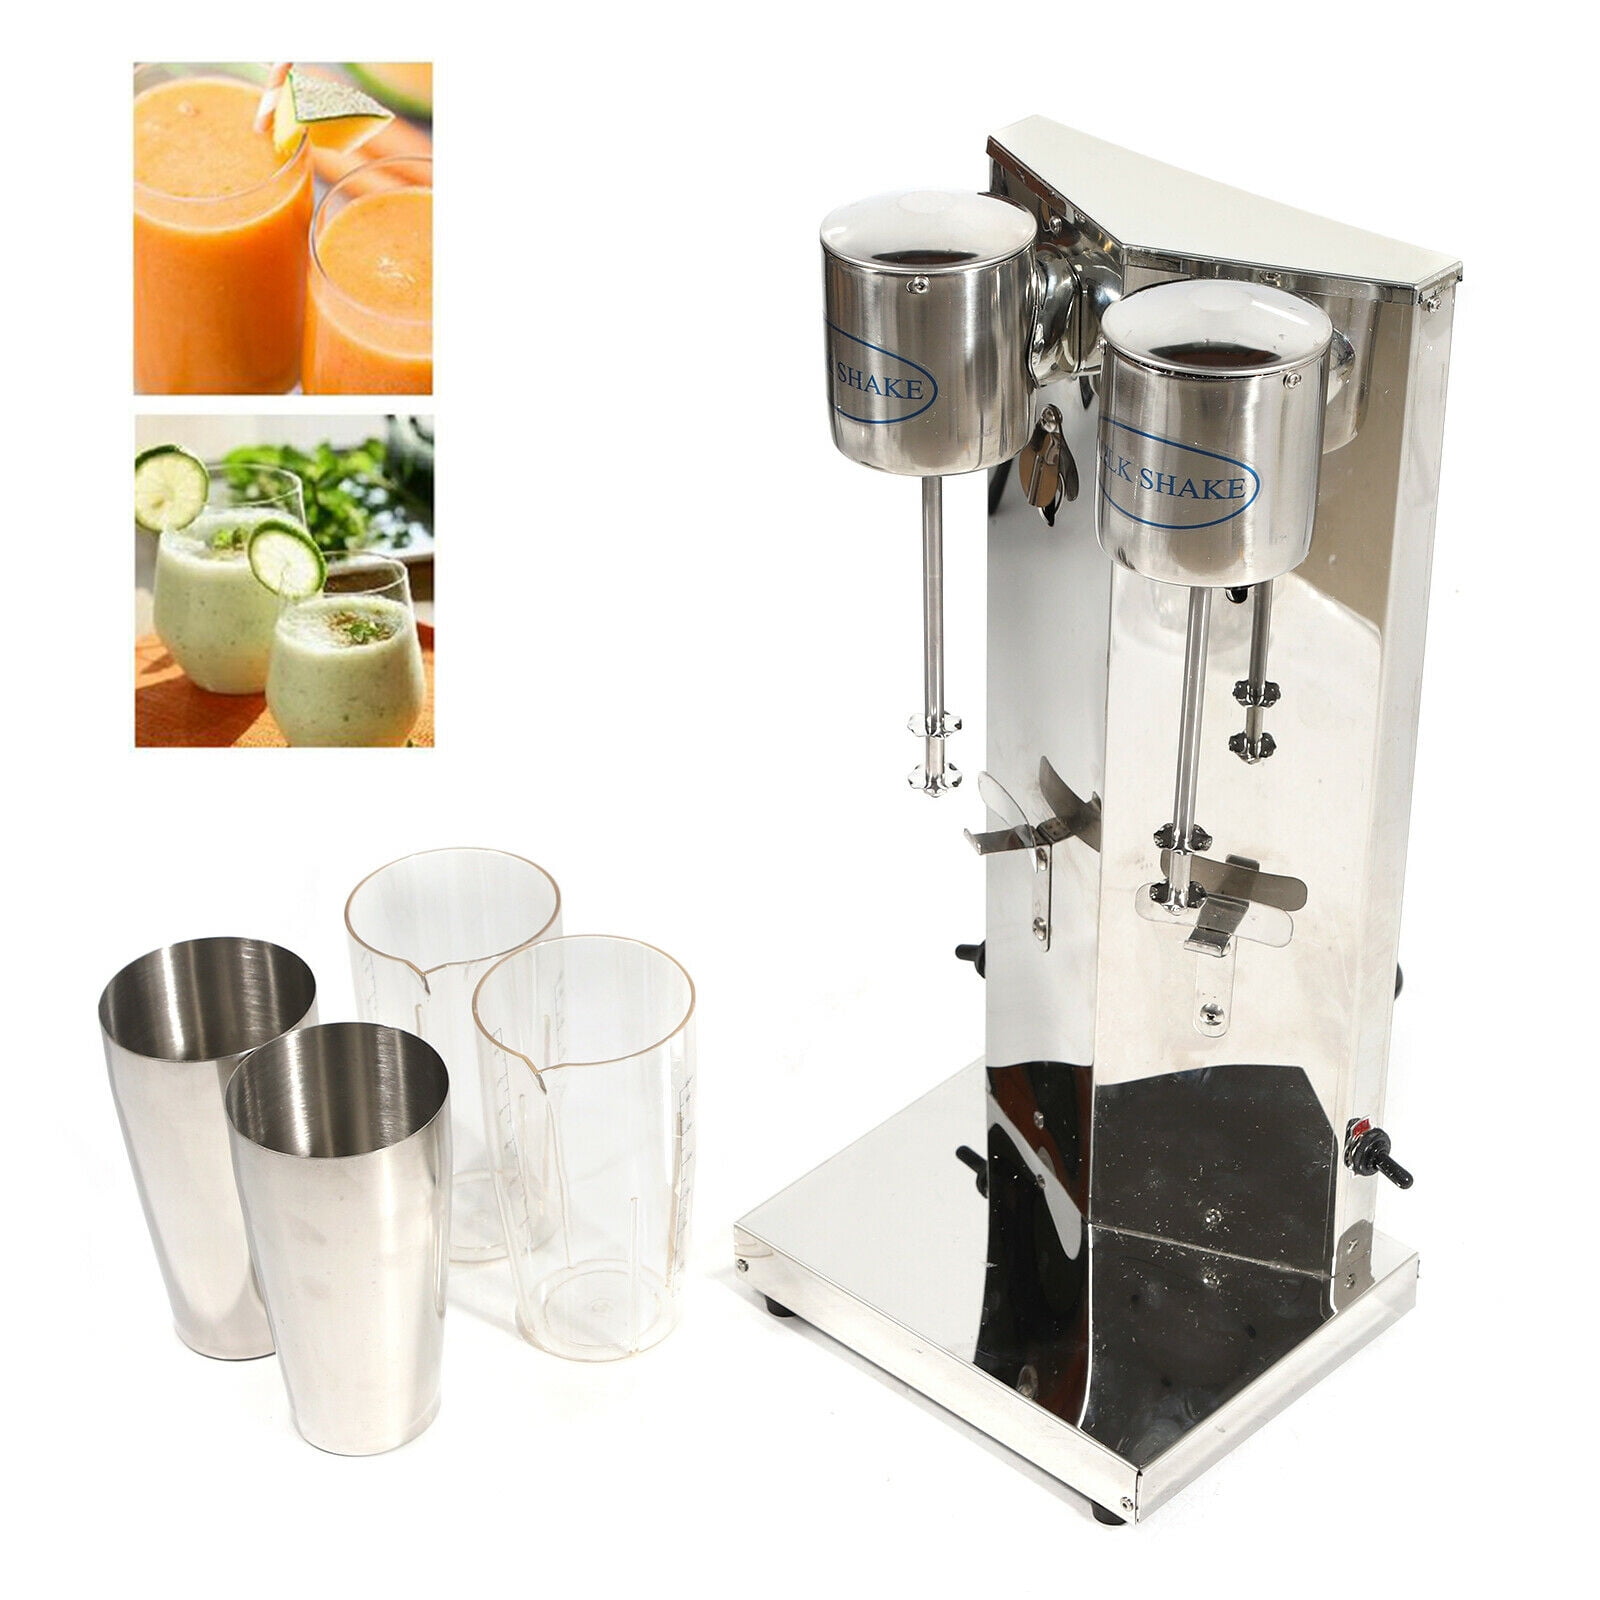 Commercial Shake Machine - Create Delicious Combinations